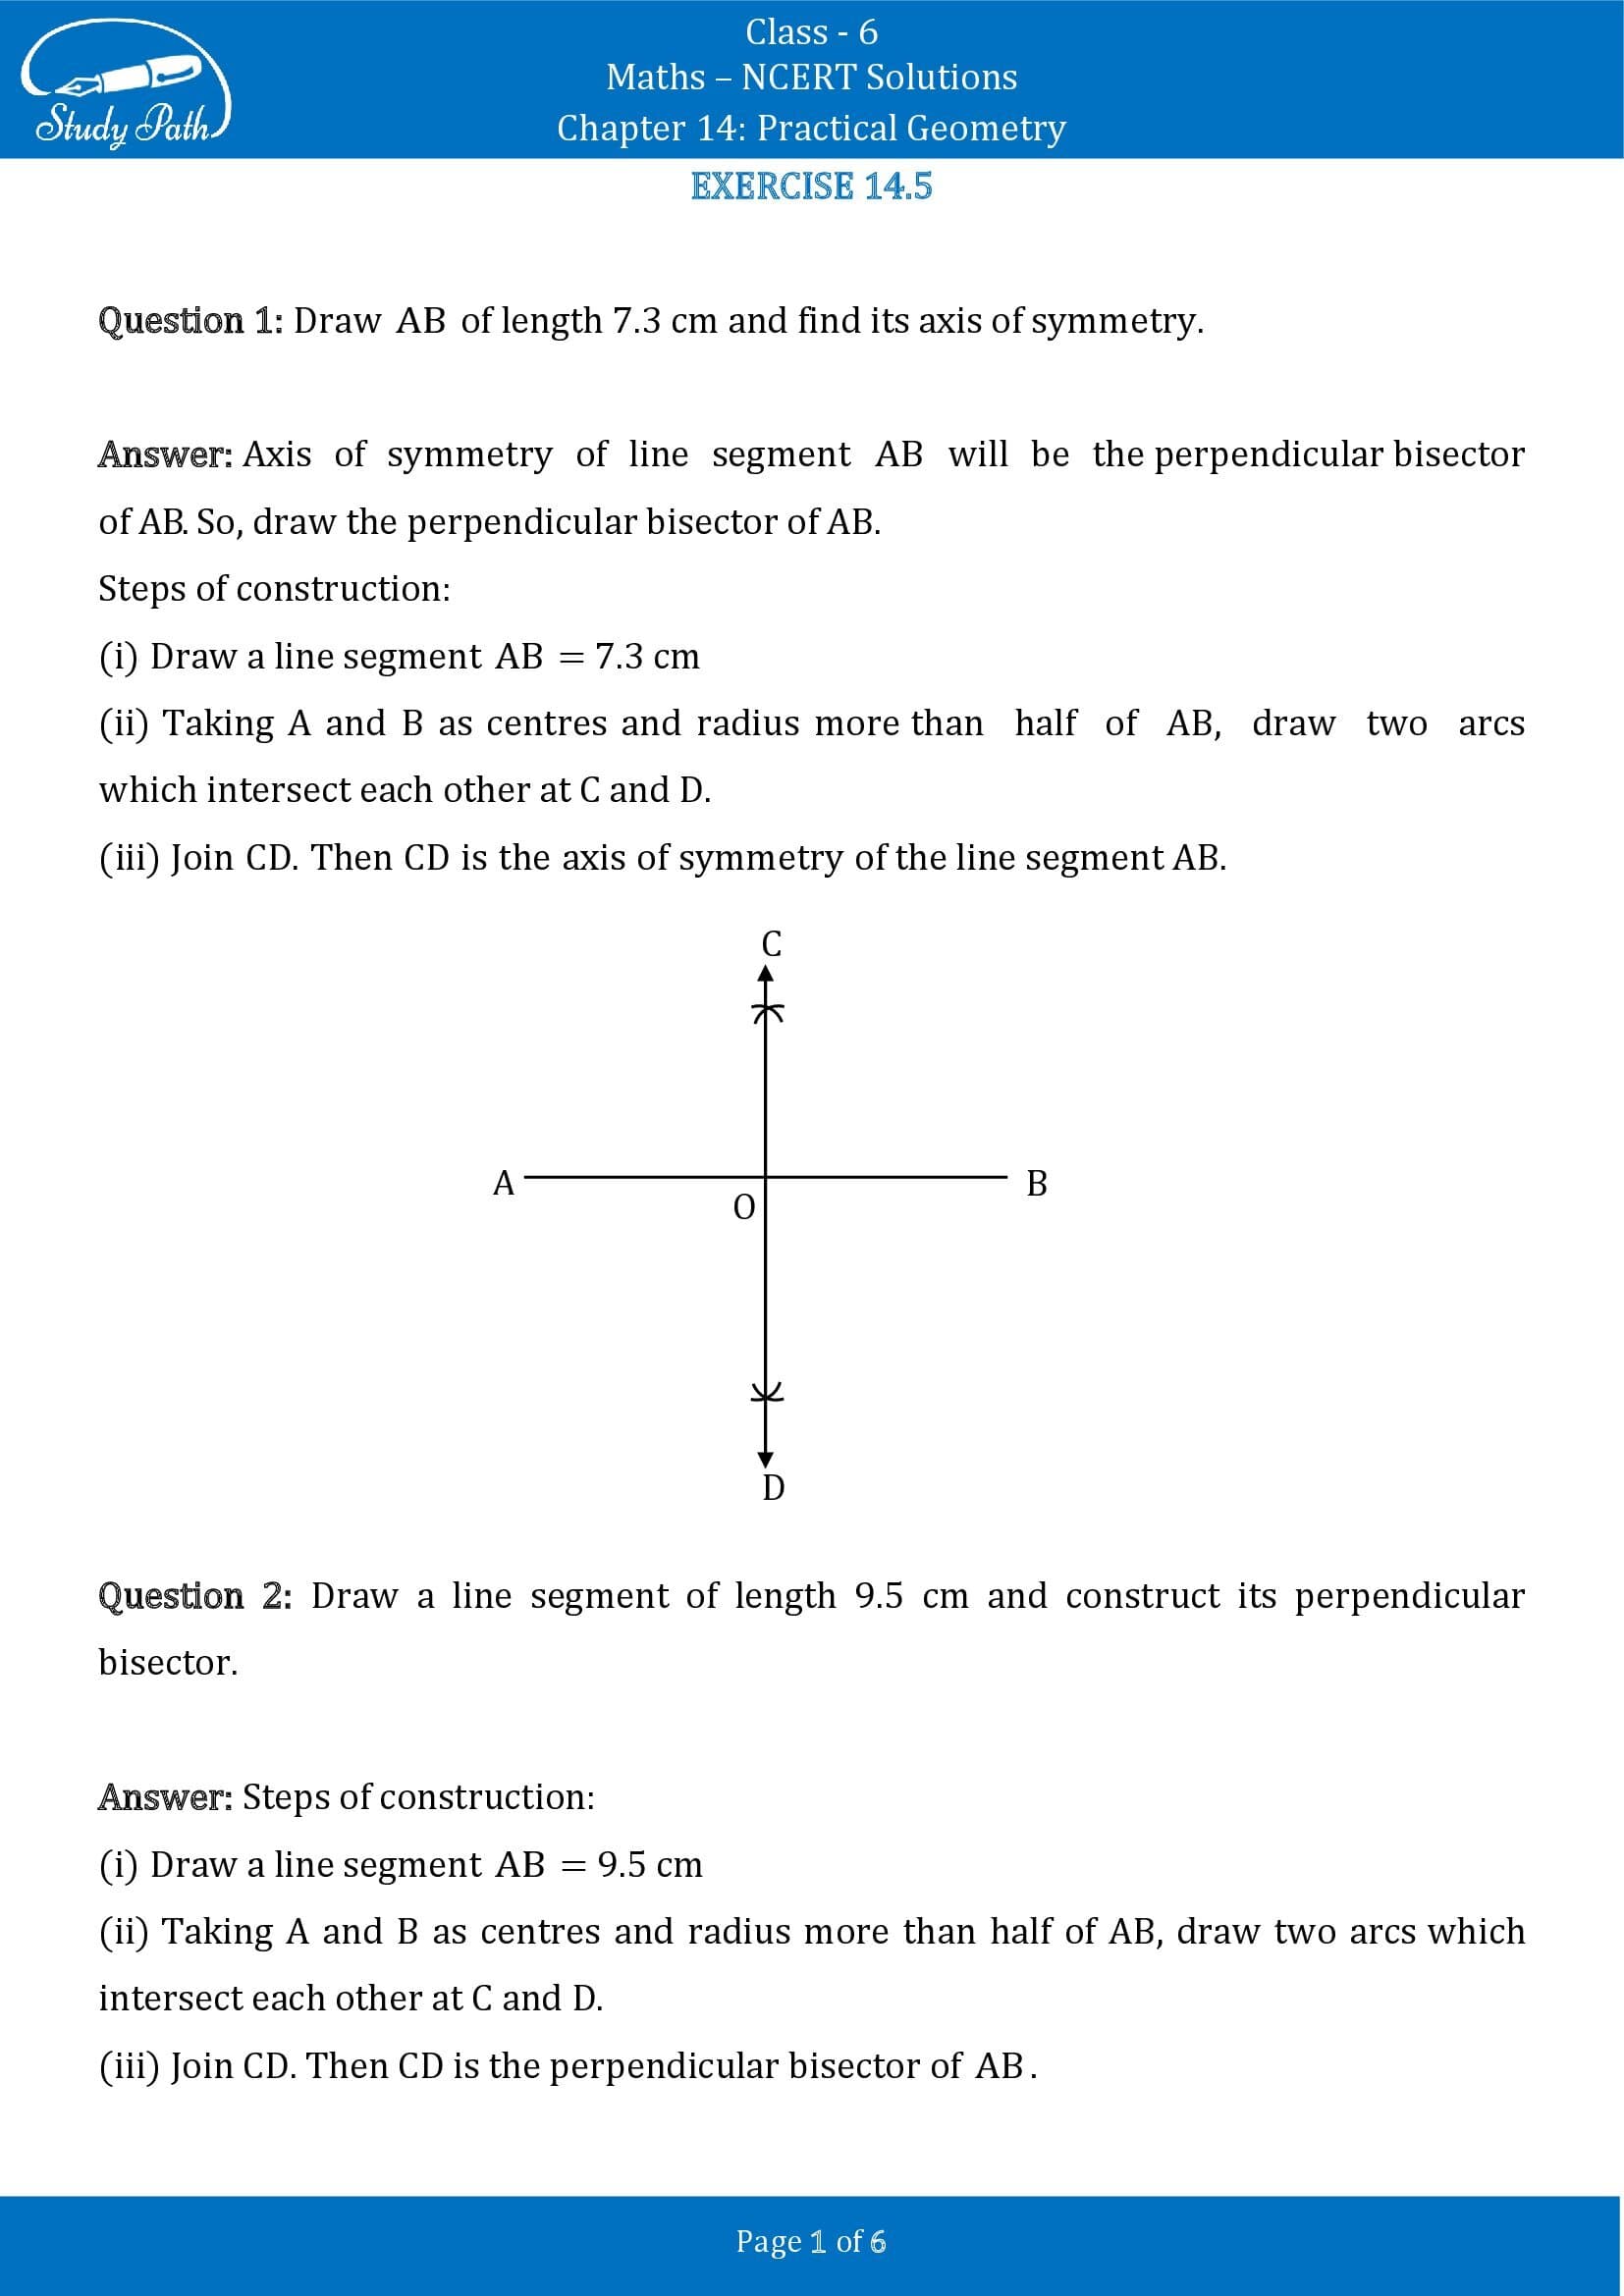 NCERT Solutions for Class 6 Maths Chapter 14 Practical Geometry Exercise 14.5 00001